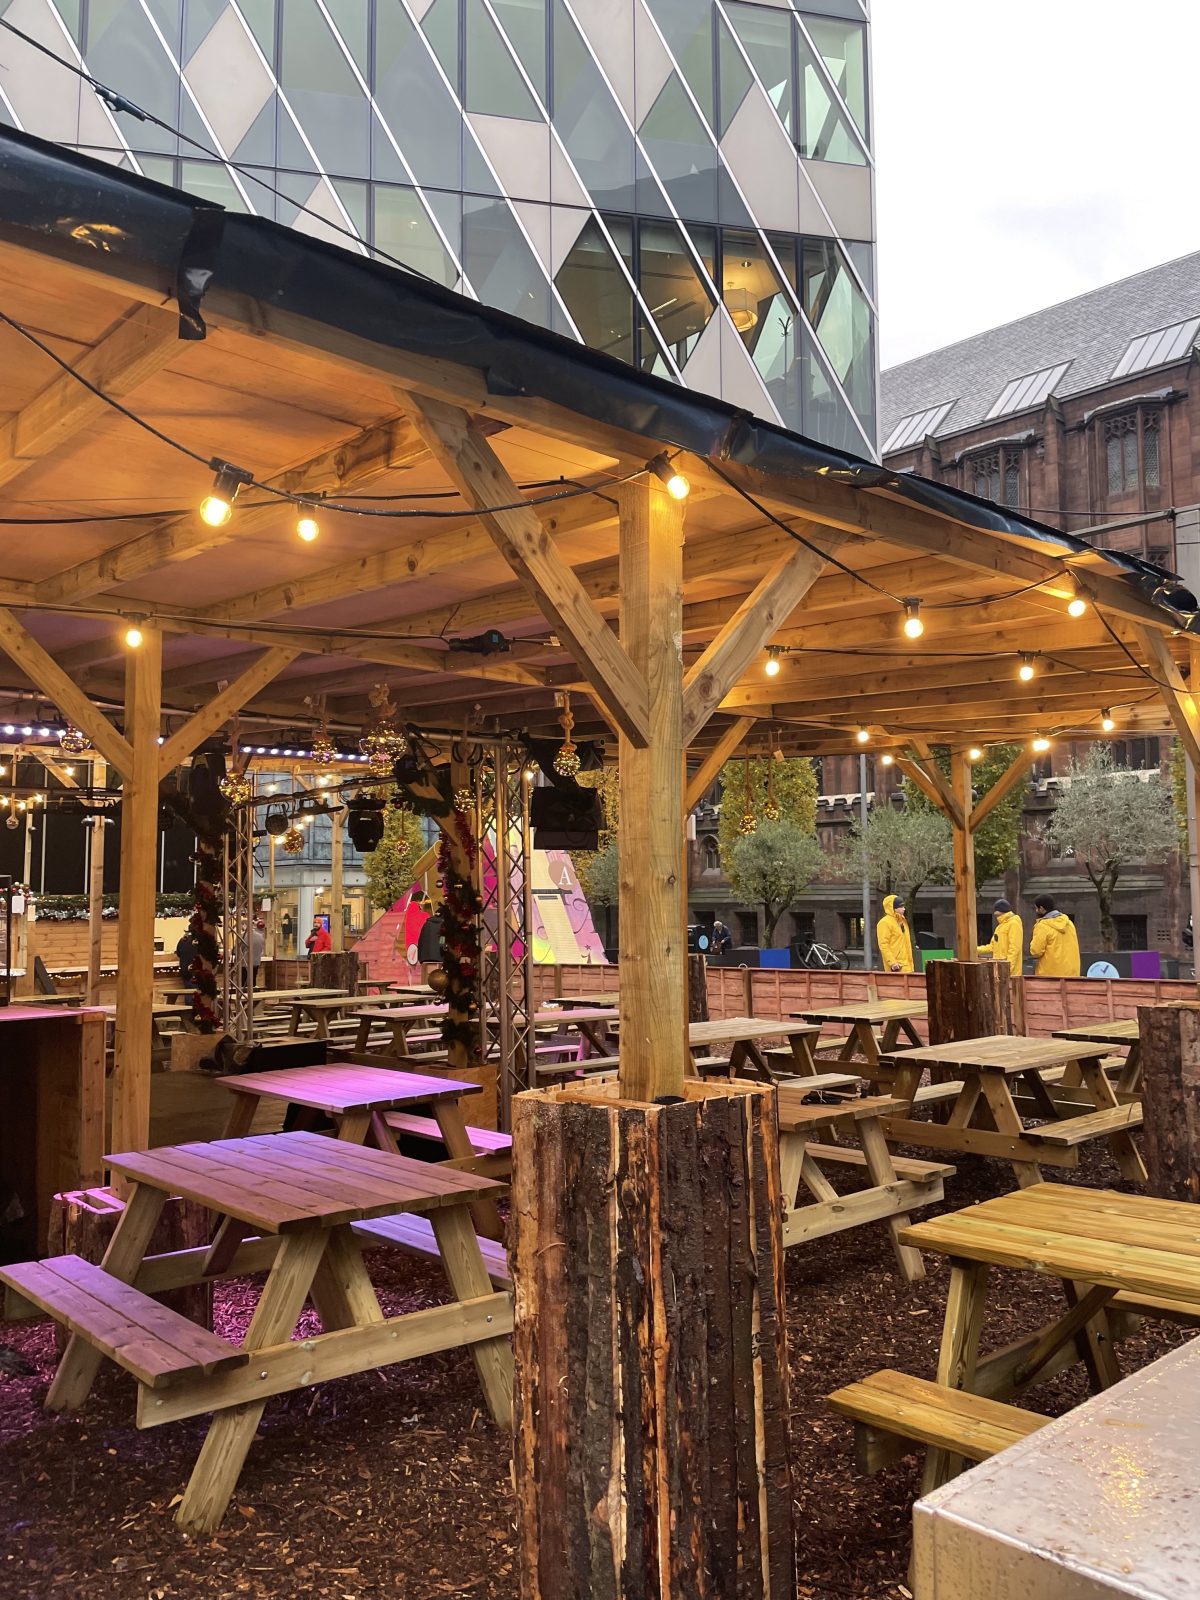 Christmas karaoke huts and curling lanes are coming to Spinningfields, The Manc